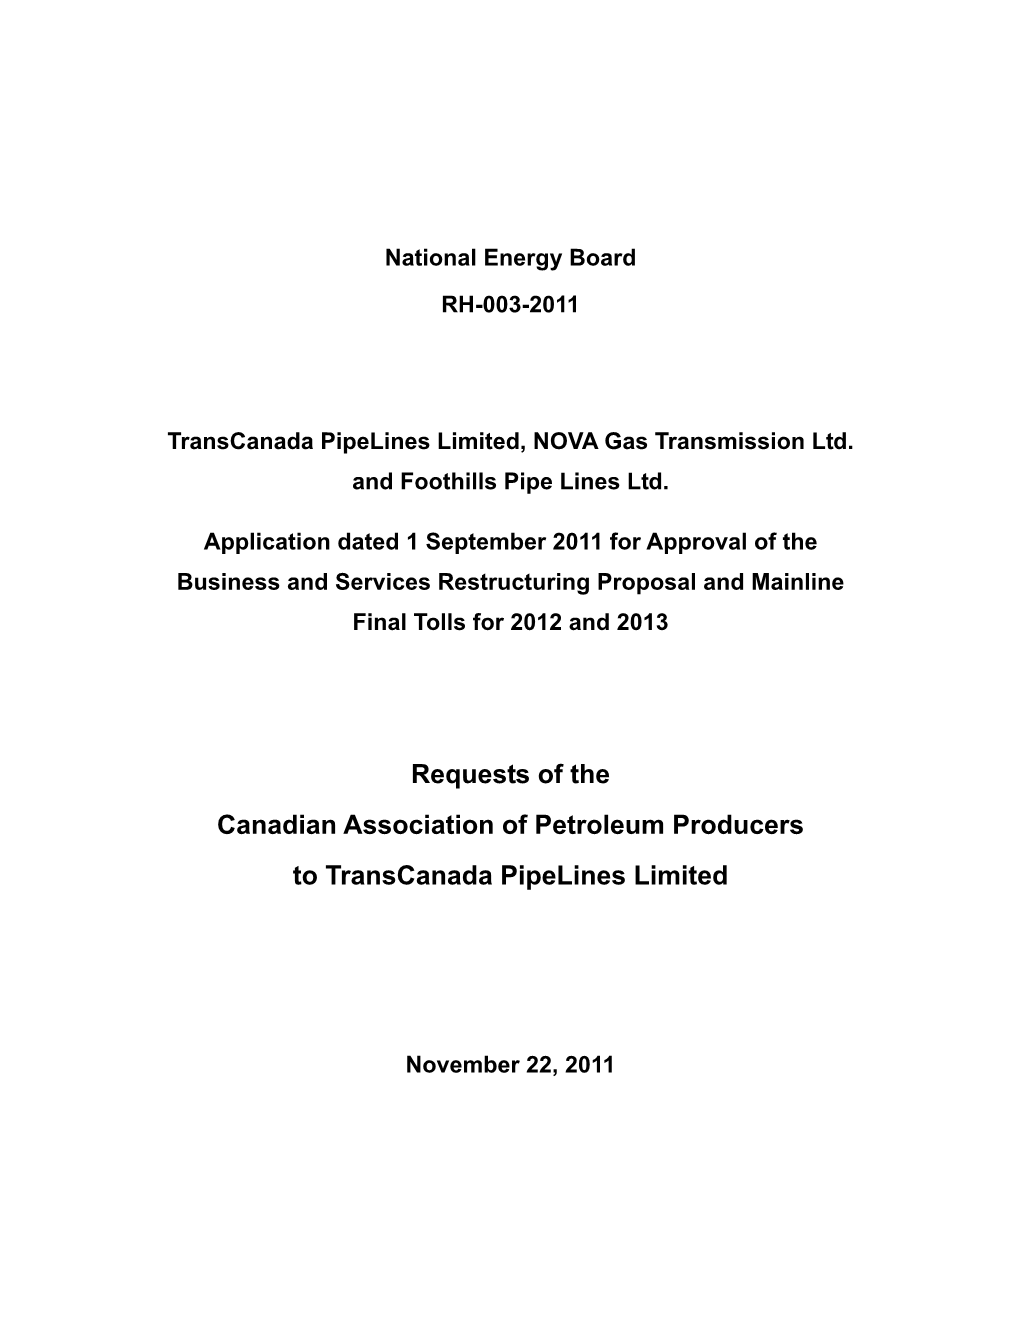 Requests of the Canadian Association of Petroleum Producers to Transcanada Pipelines Limited